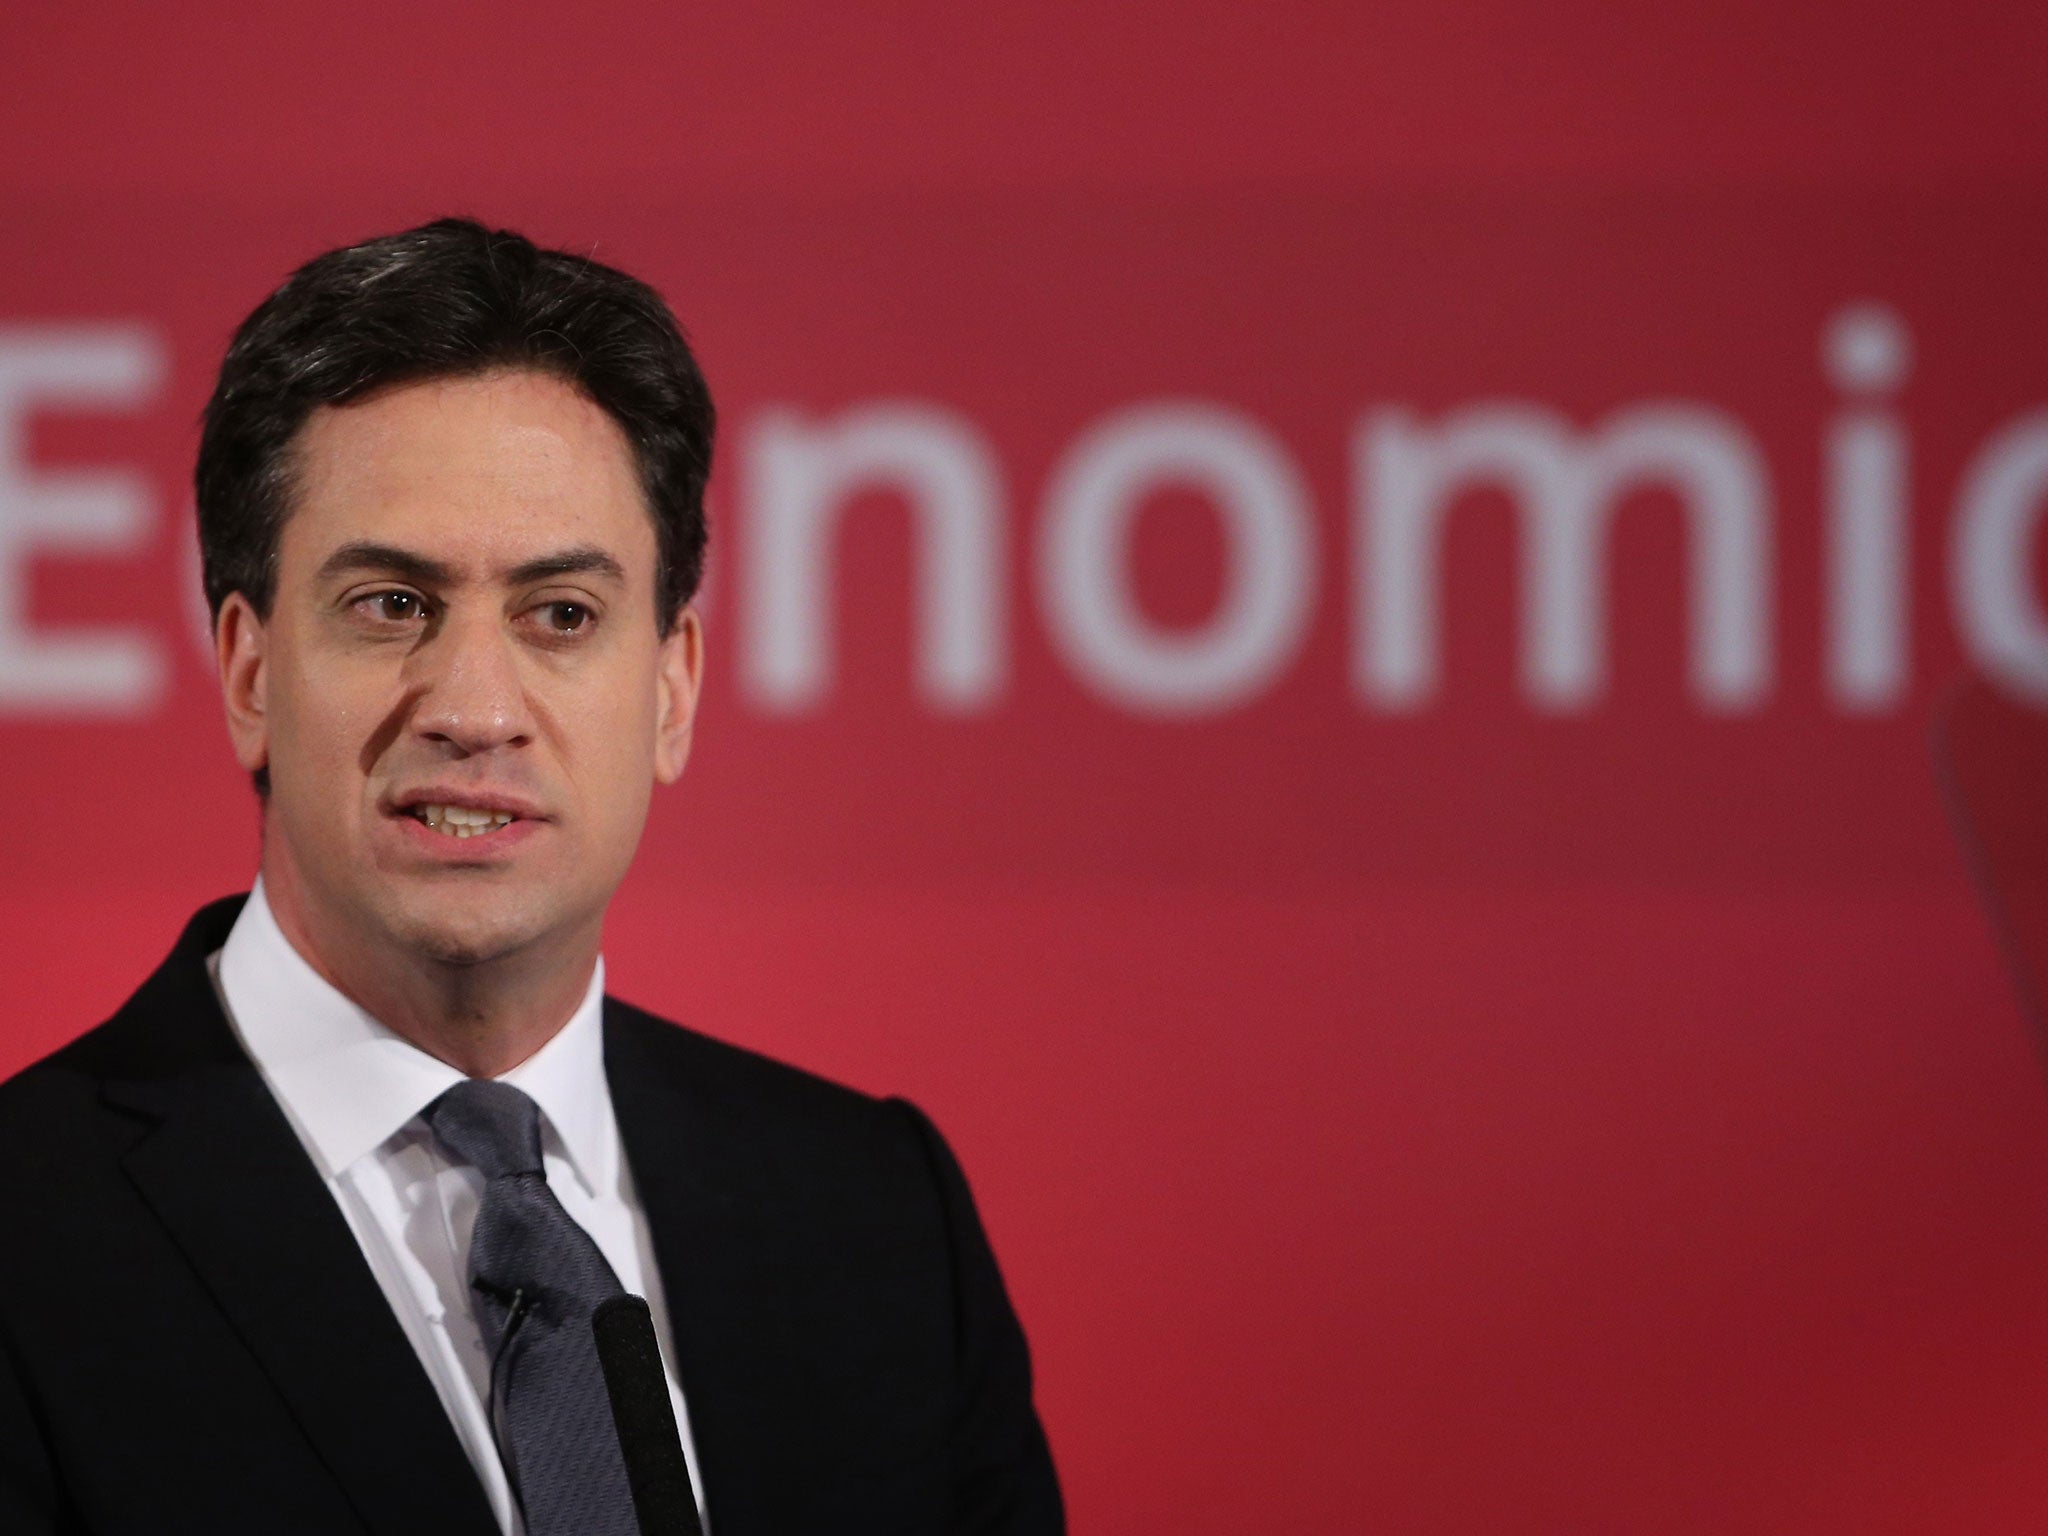 Labour Party leader Ed Miliband speaks to business leaders on December 11, 2014 in London, England